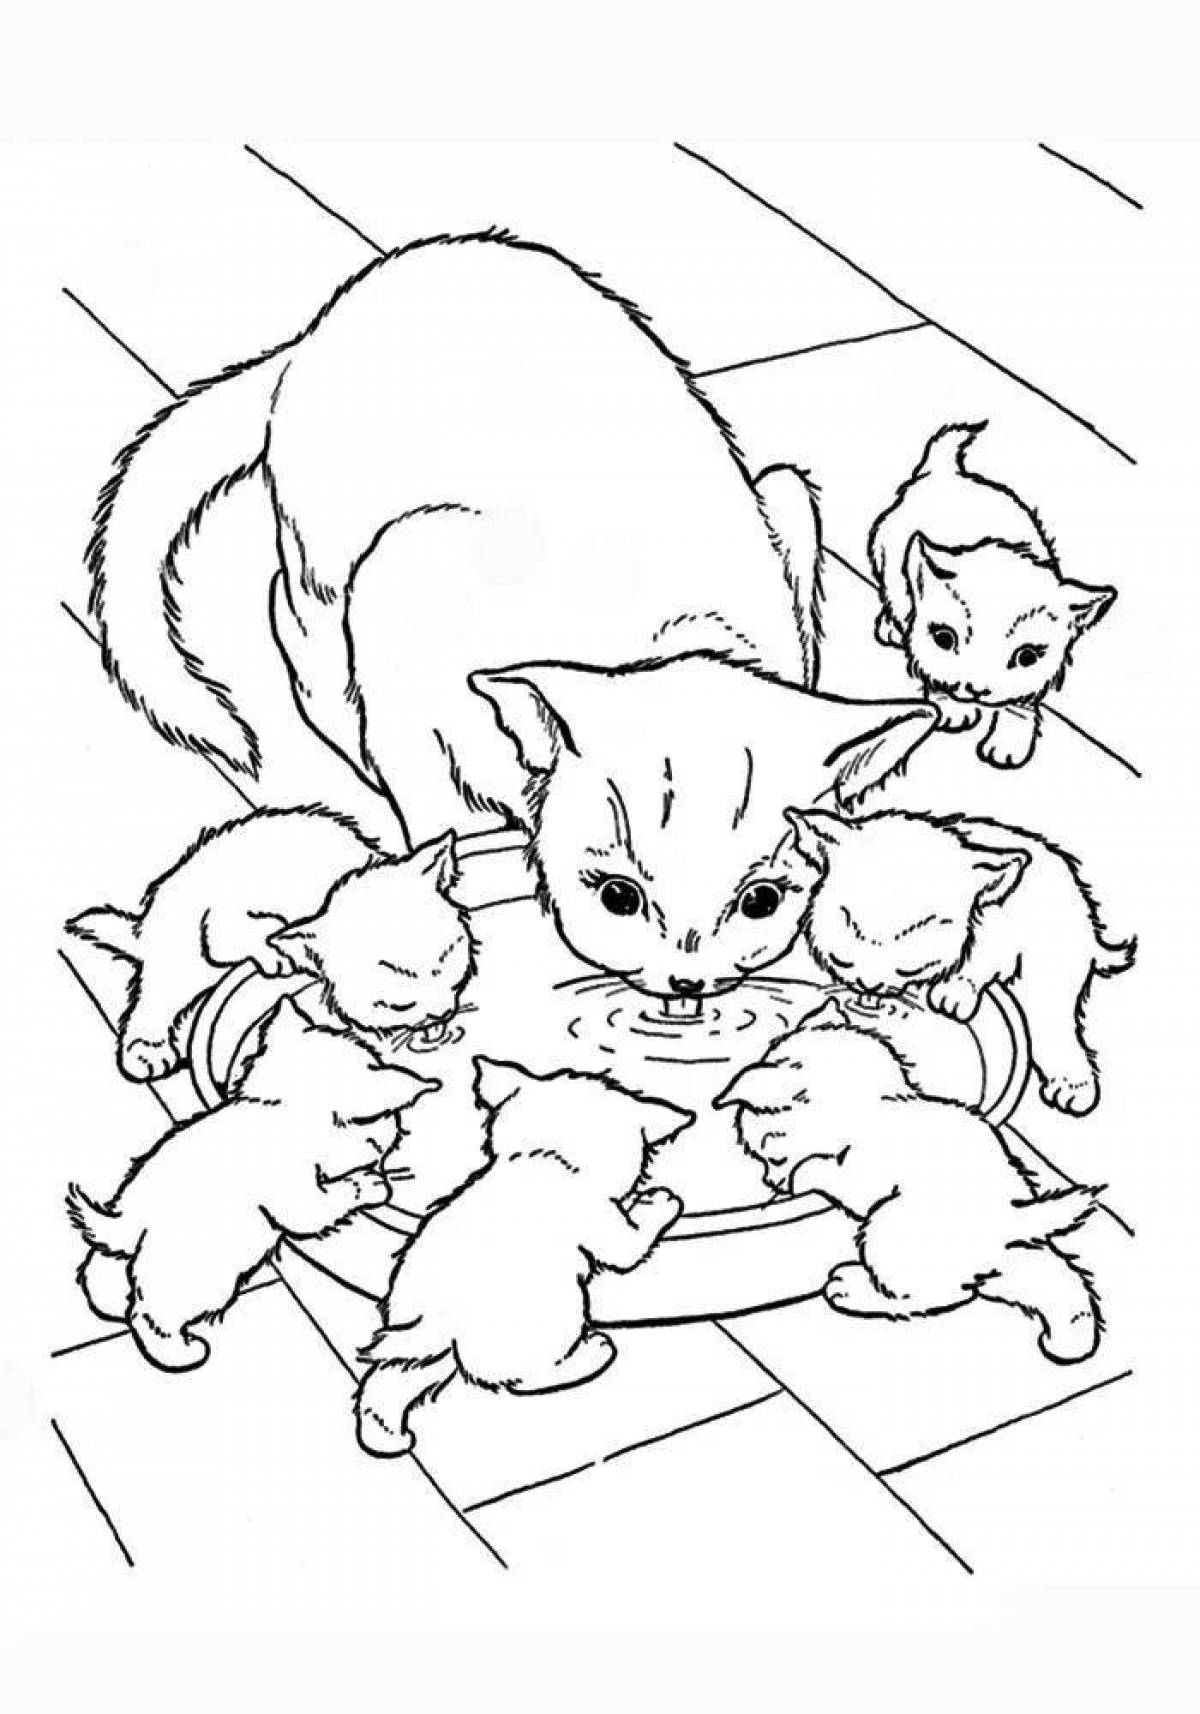 Adorable cat coloring pages